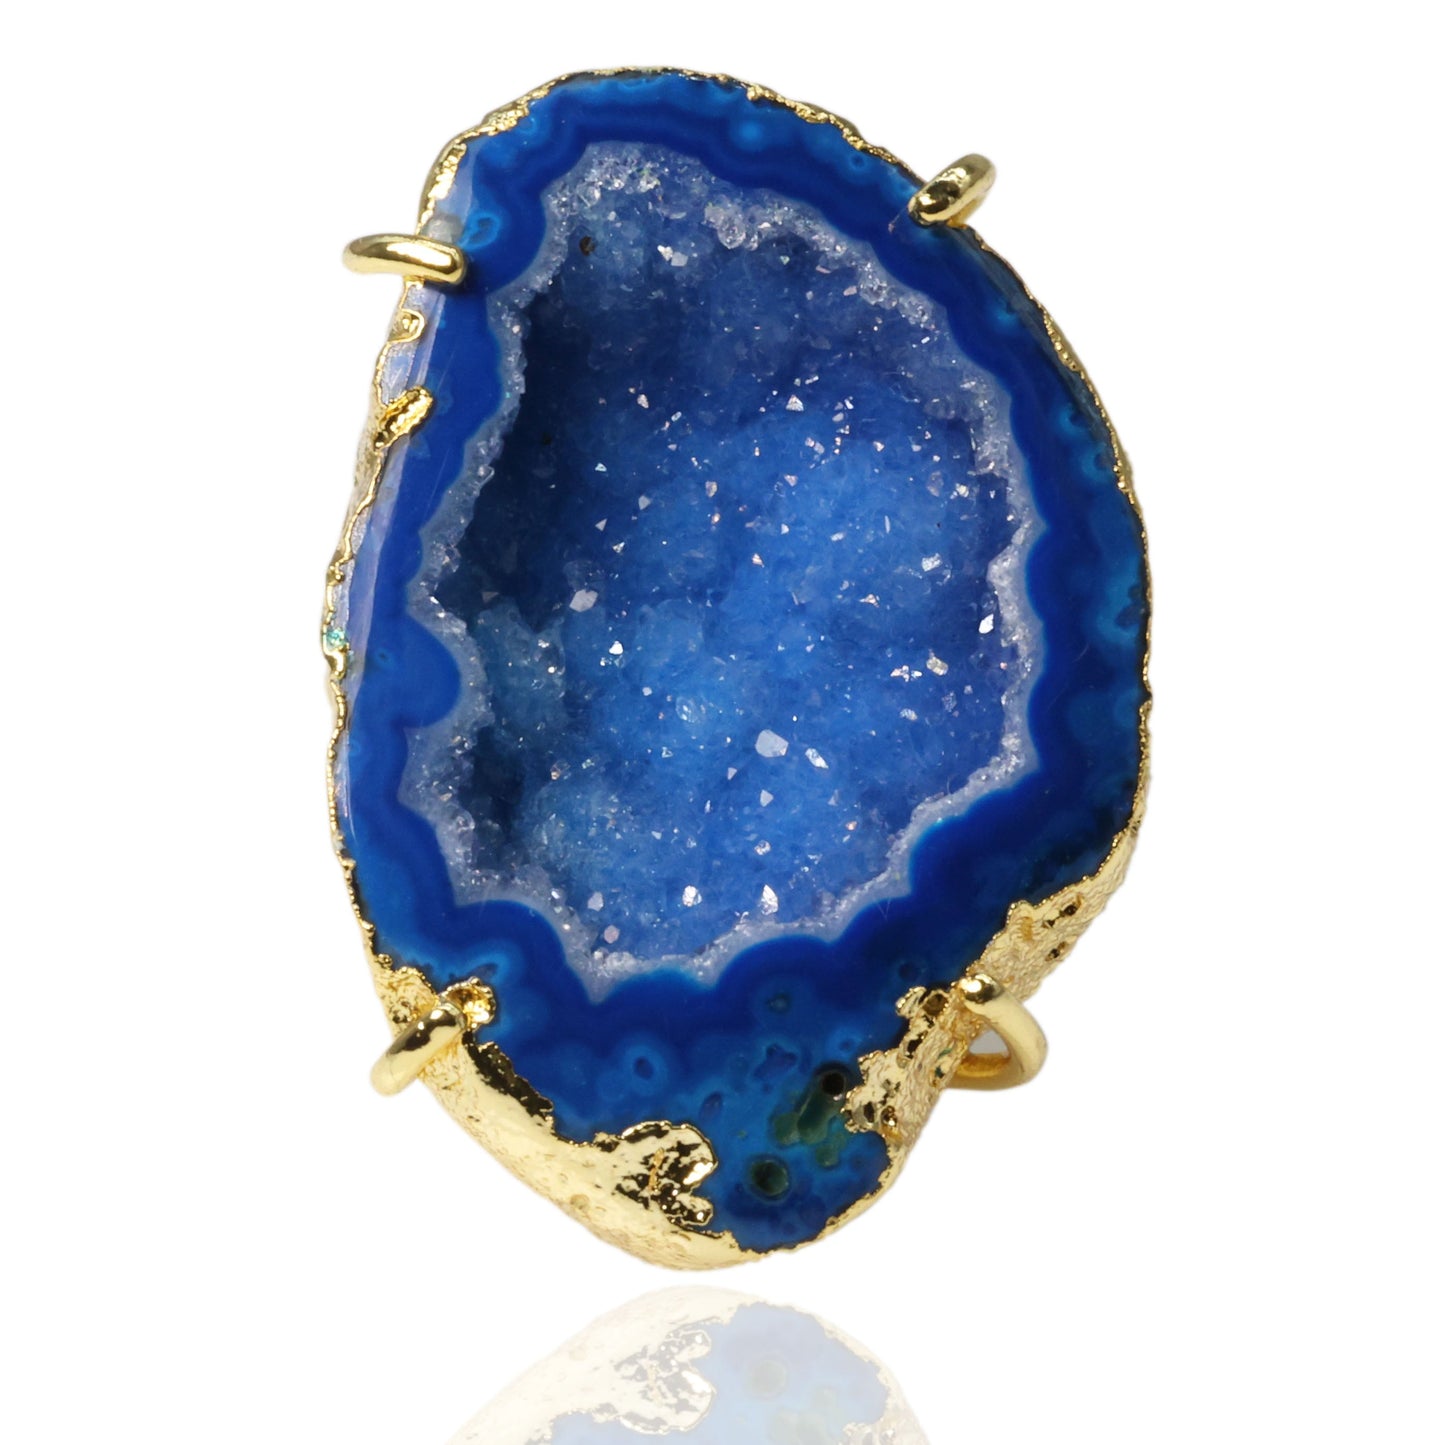 Anokha Large Geode Statement Rings, 30 - 40 MM, Unlimited Sparkle in Life !! - Meena Design